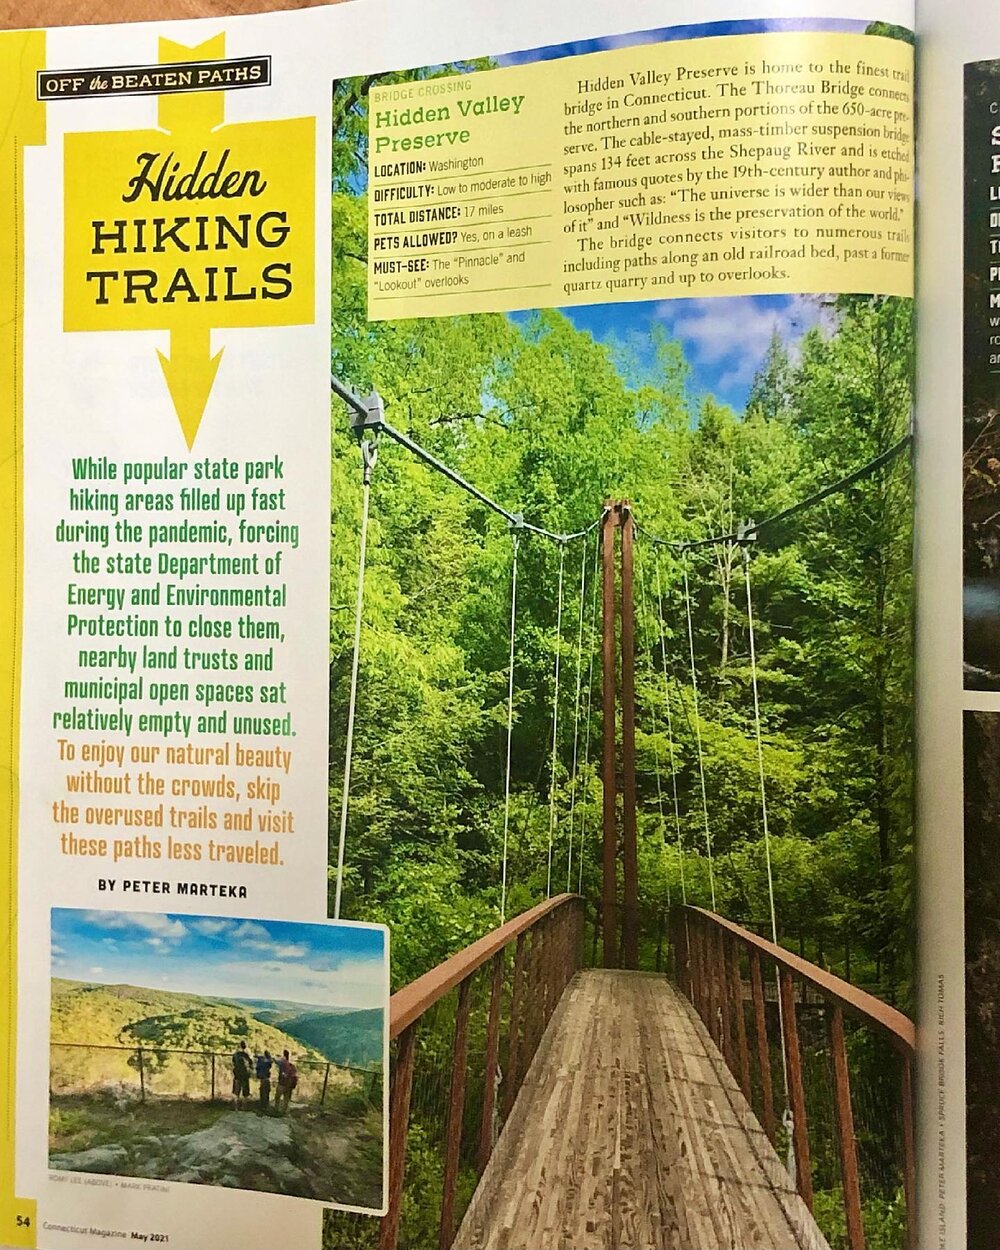 Check it out! One of my pictures made it into @connecticutmagazine. Check out the May Issue to see my photo of Thoreau&rsquo;s Bridge on the Hidden Valley Preserve Trail.⁣
⁣⁣
⁣CT is my home state and I think this is a great issue to take a look at fo